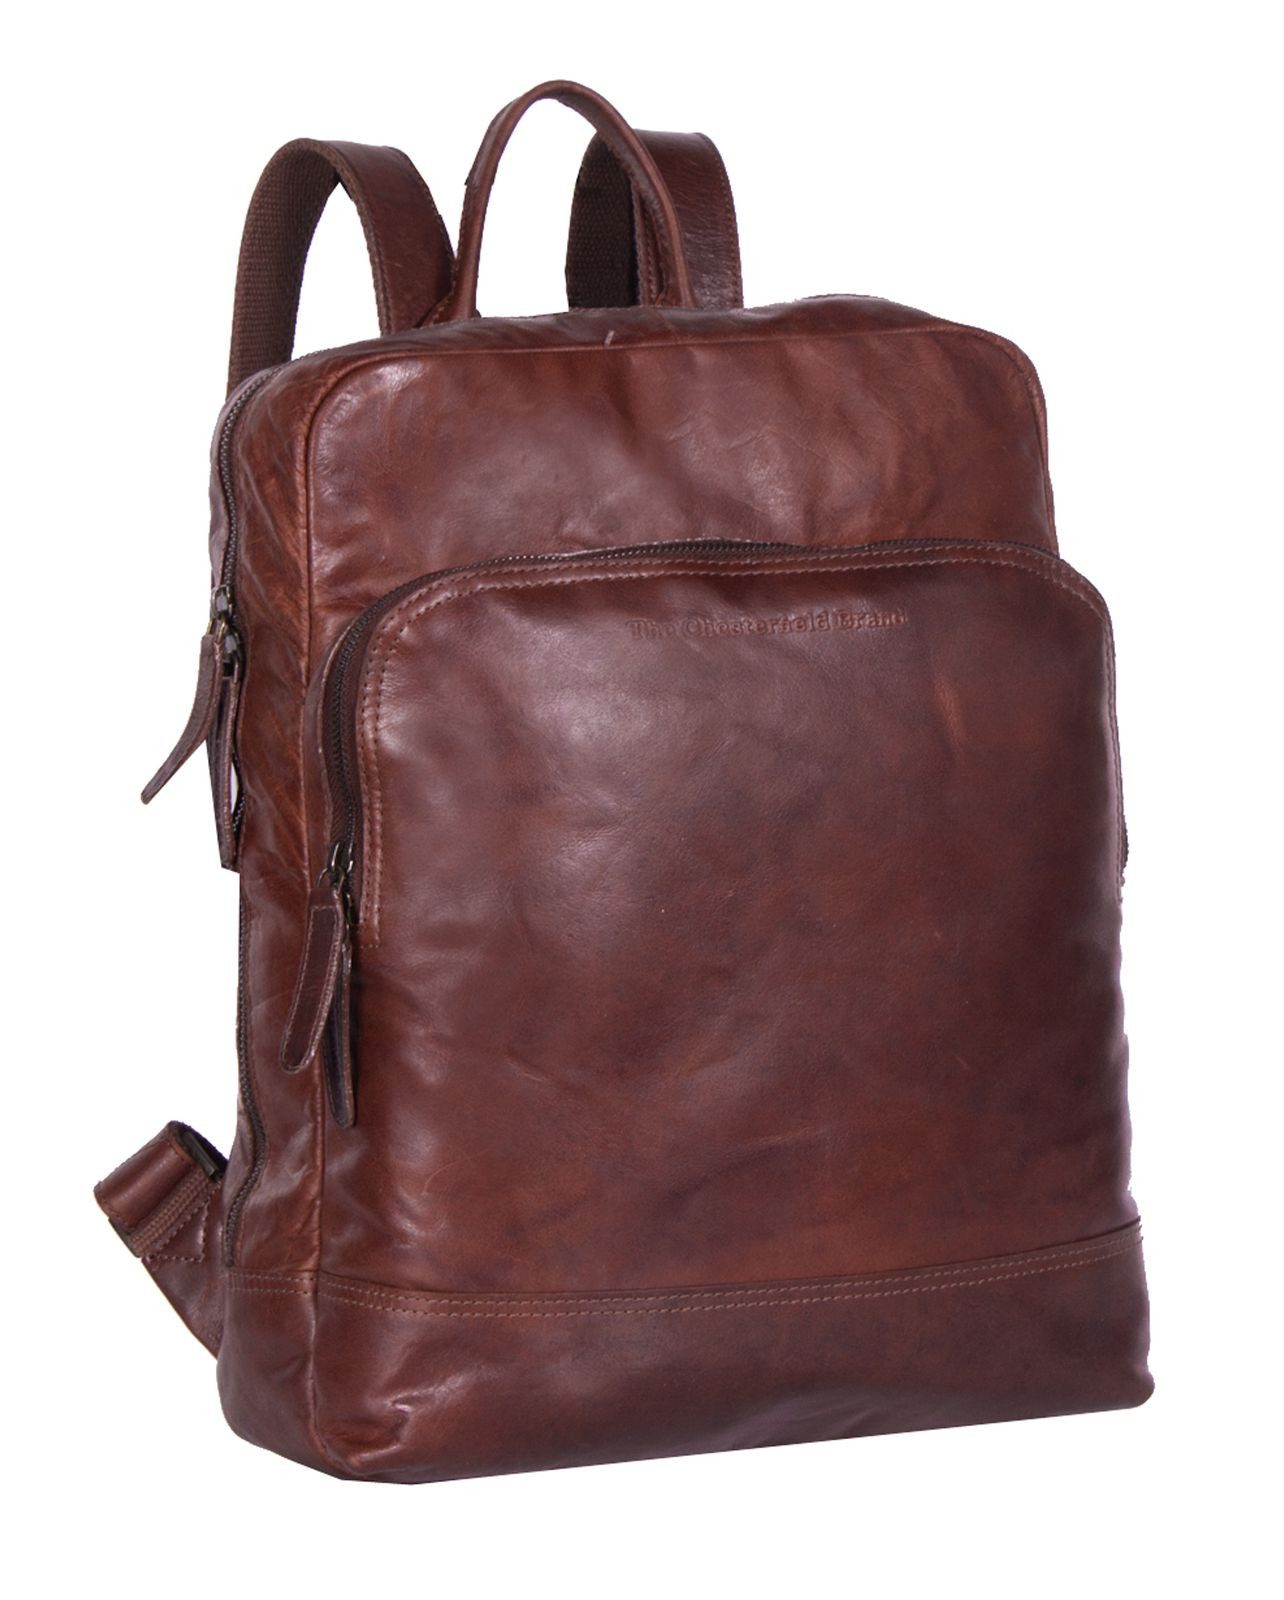 Chesterfield Rucksack Brand Brown The